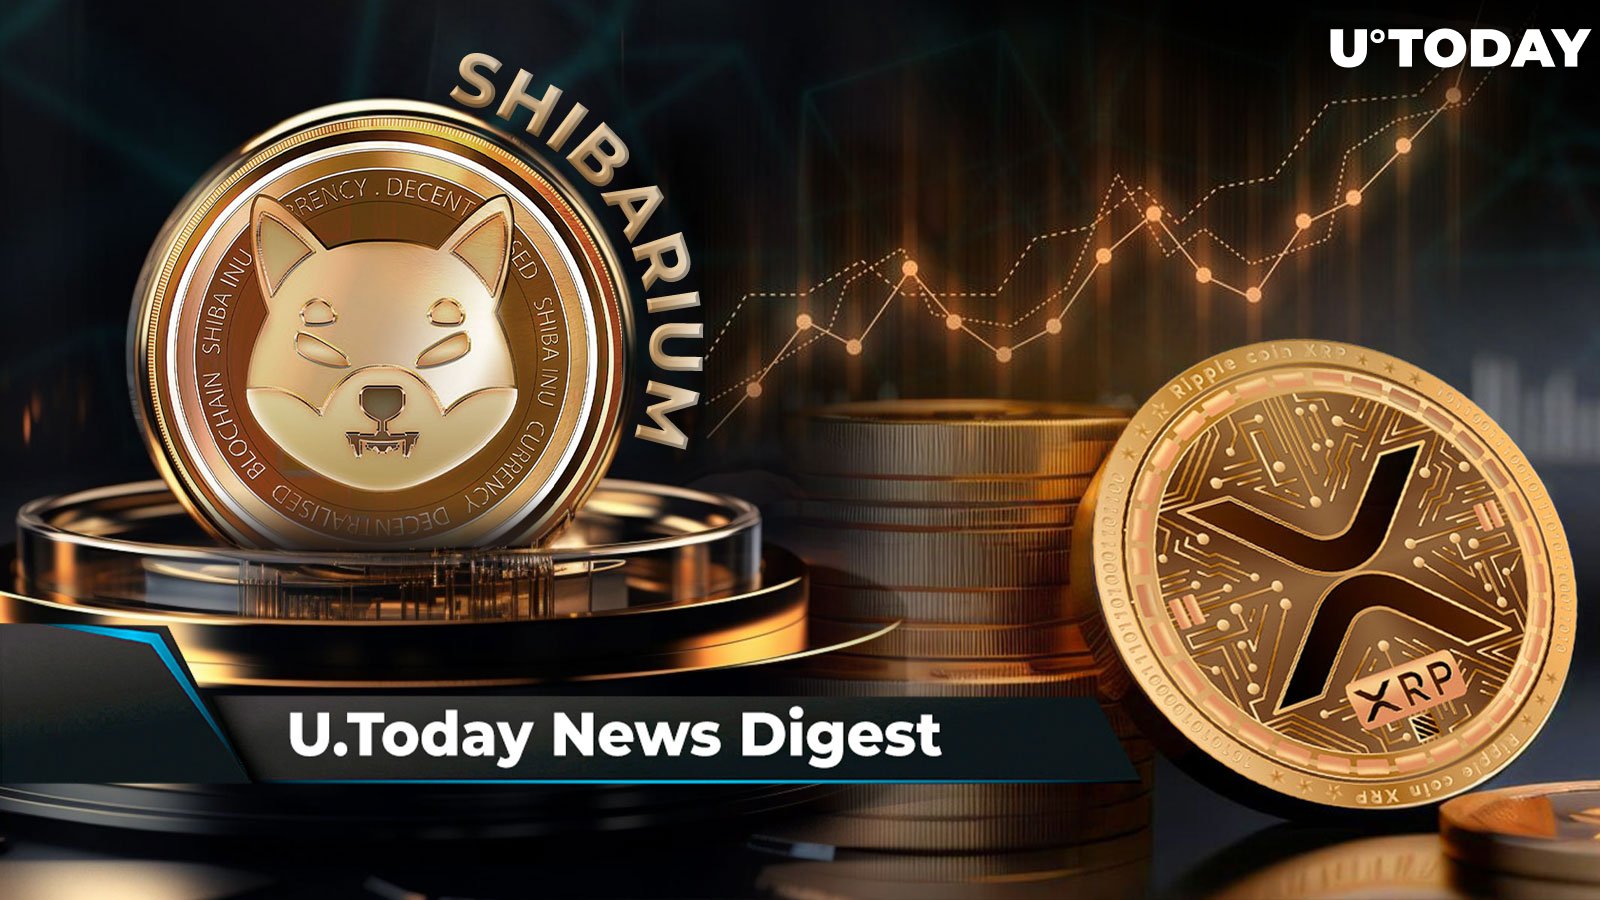 Shibarium Achieves Significant New Milestone, XRP Sees 74% Volume Spike on Christmas, Robert Kiyosaki Reveals Assets He Made Fortune On: Crypto News Digest by U.Today